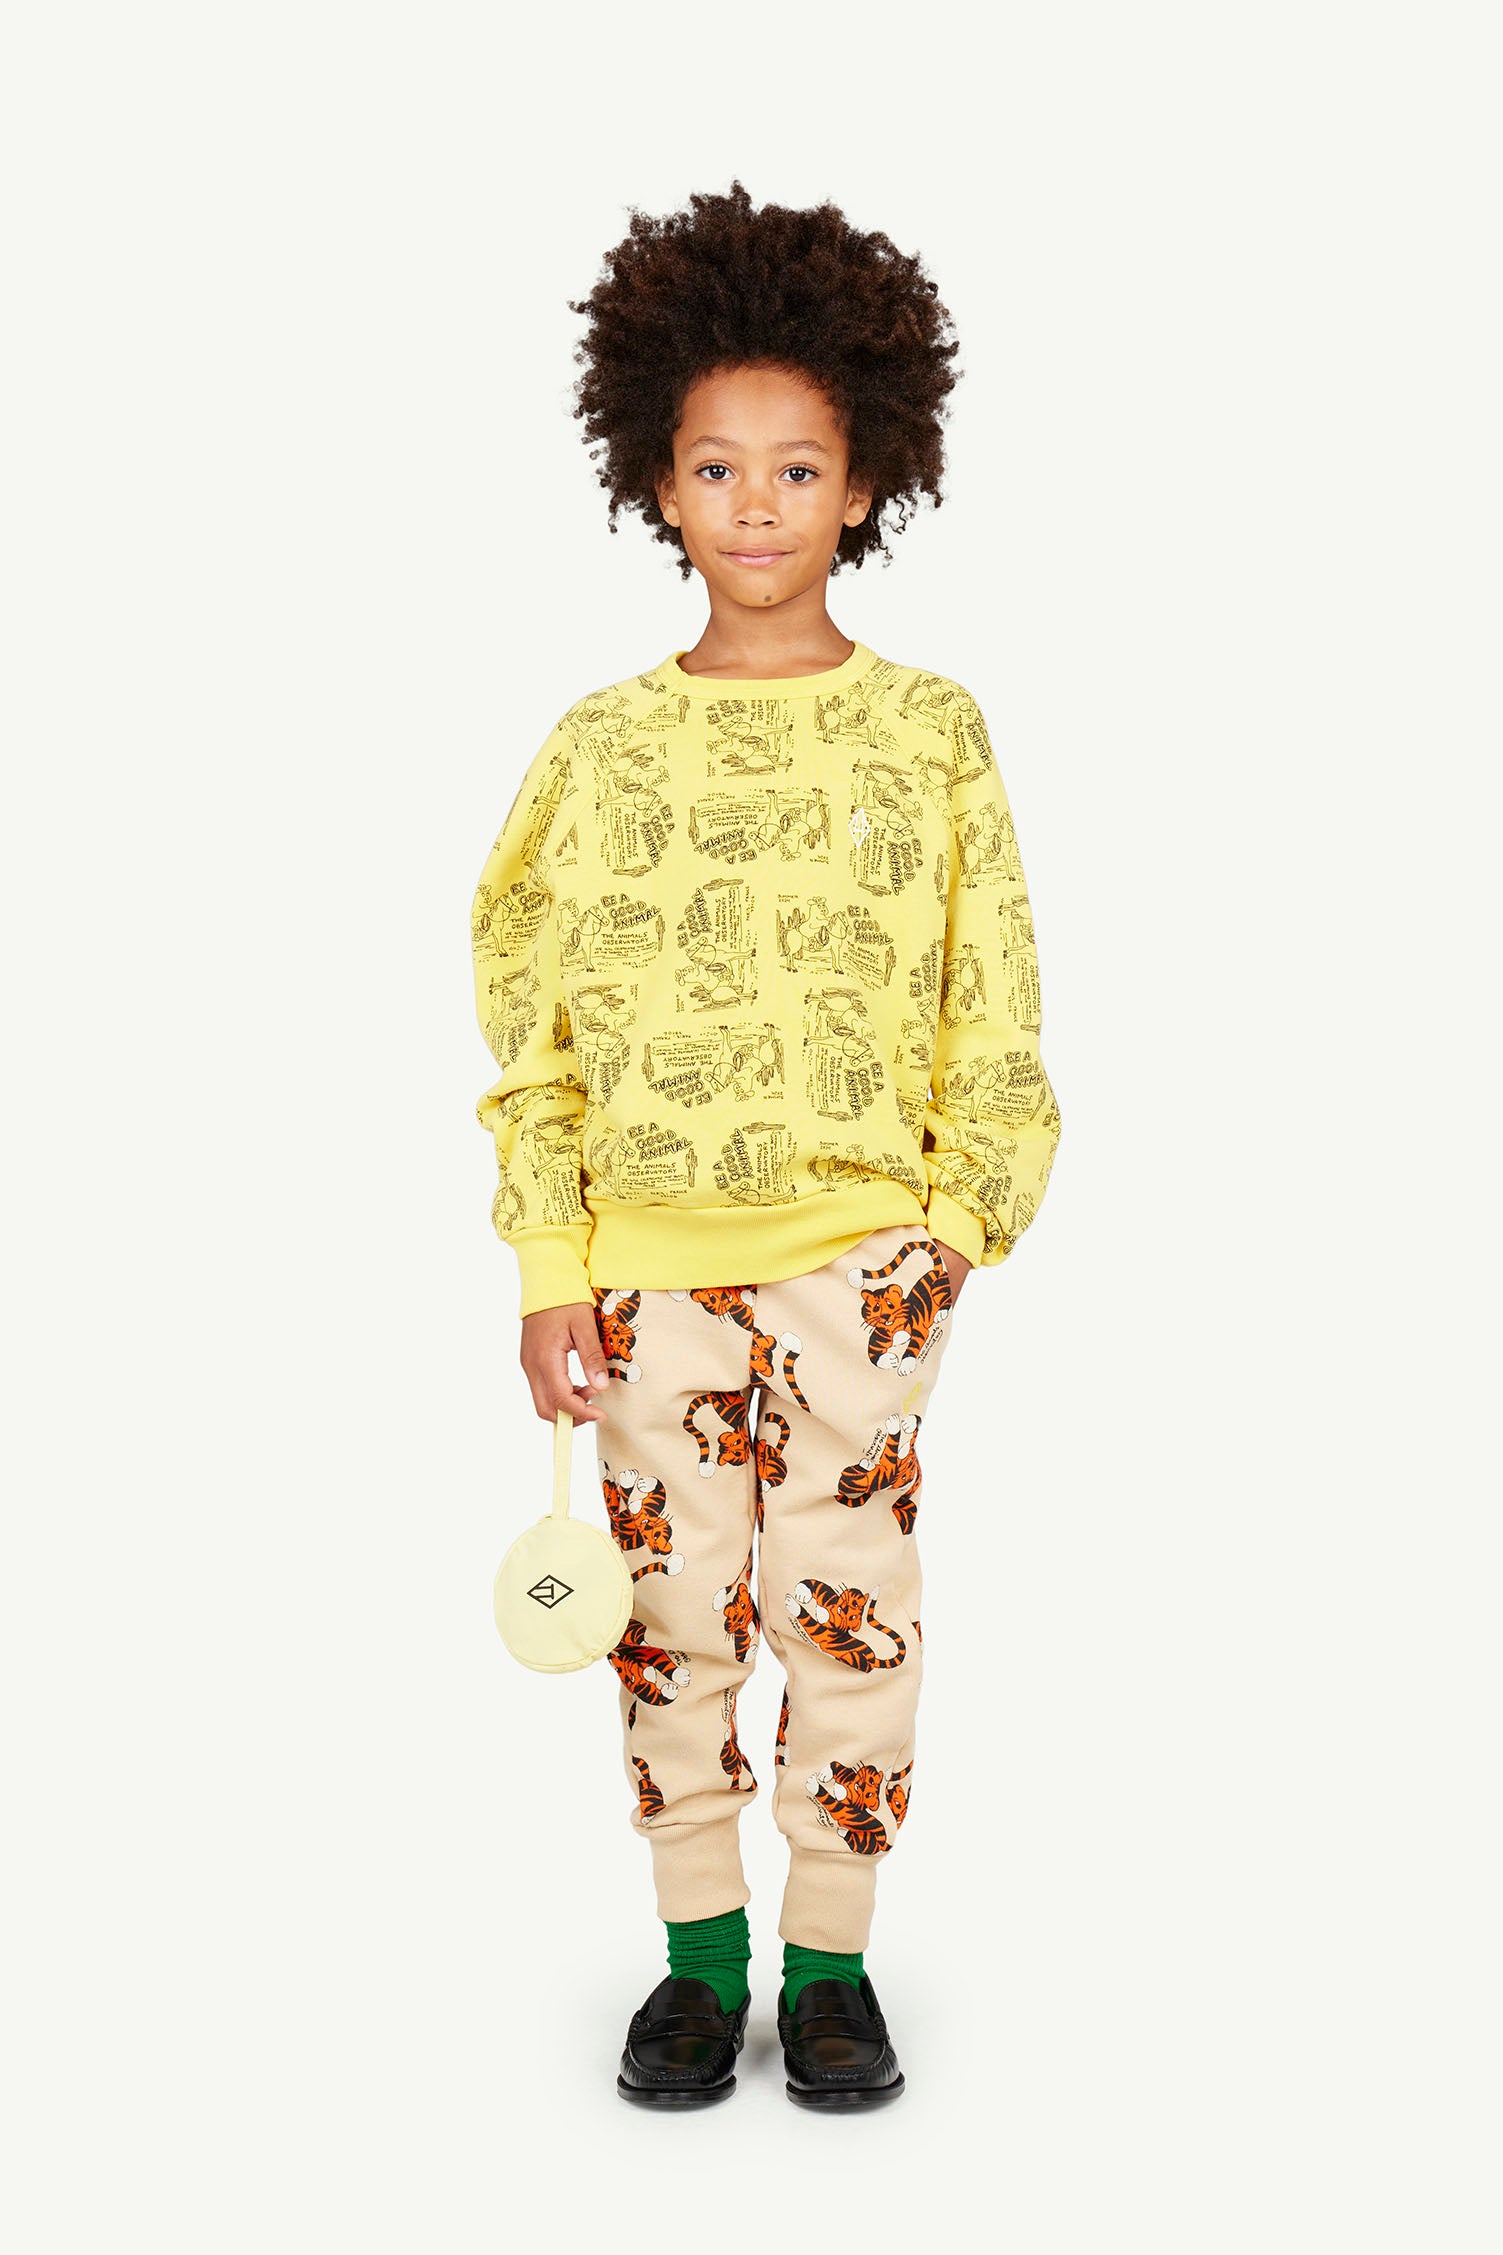 The animals observatory - panther kids pants - beige